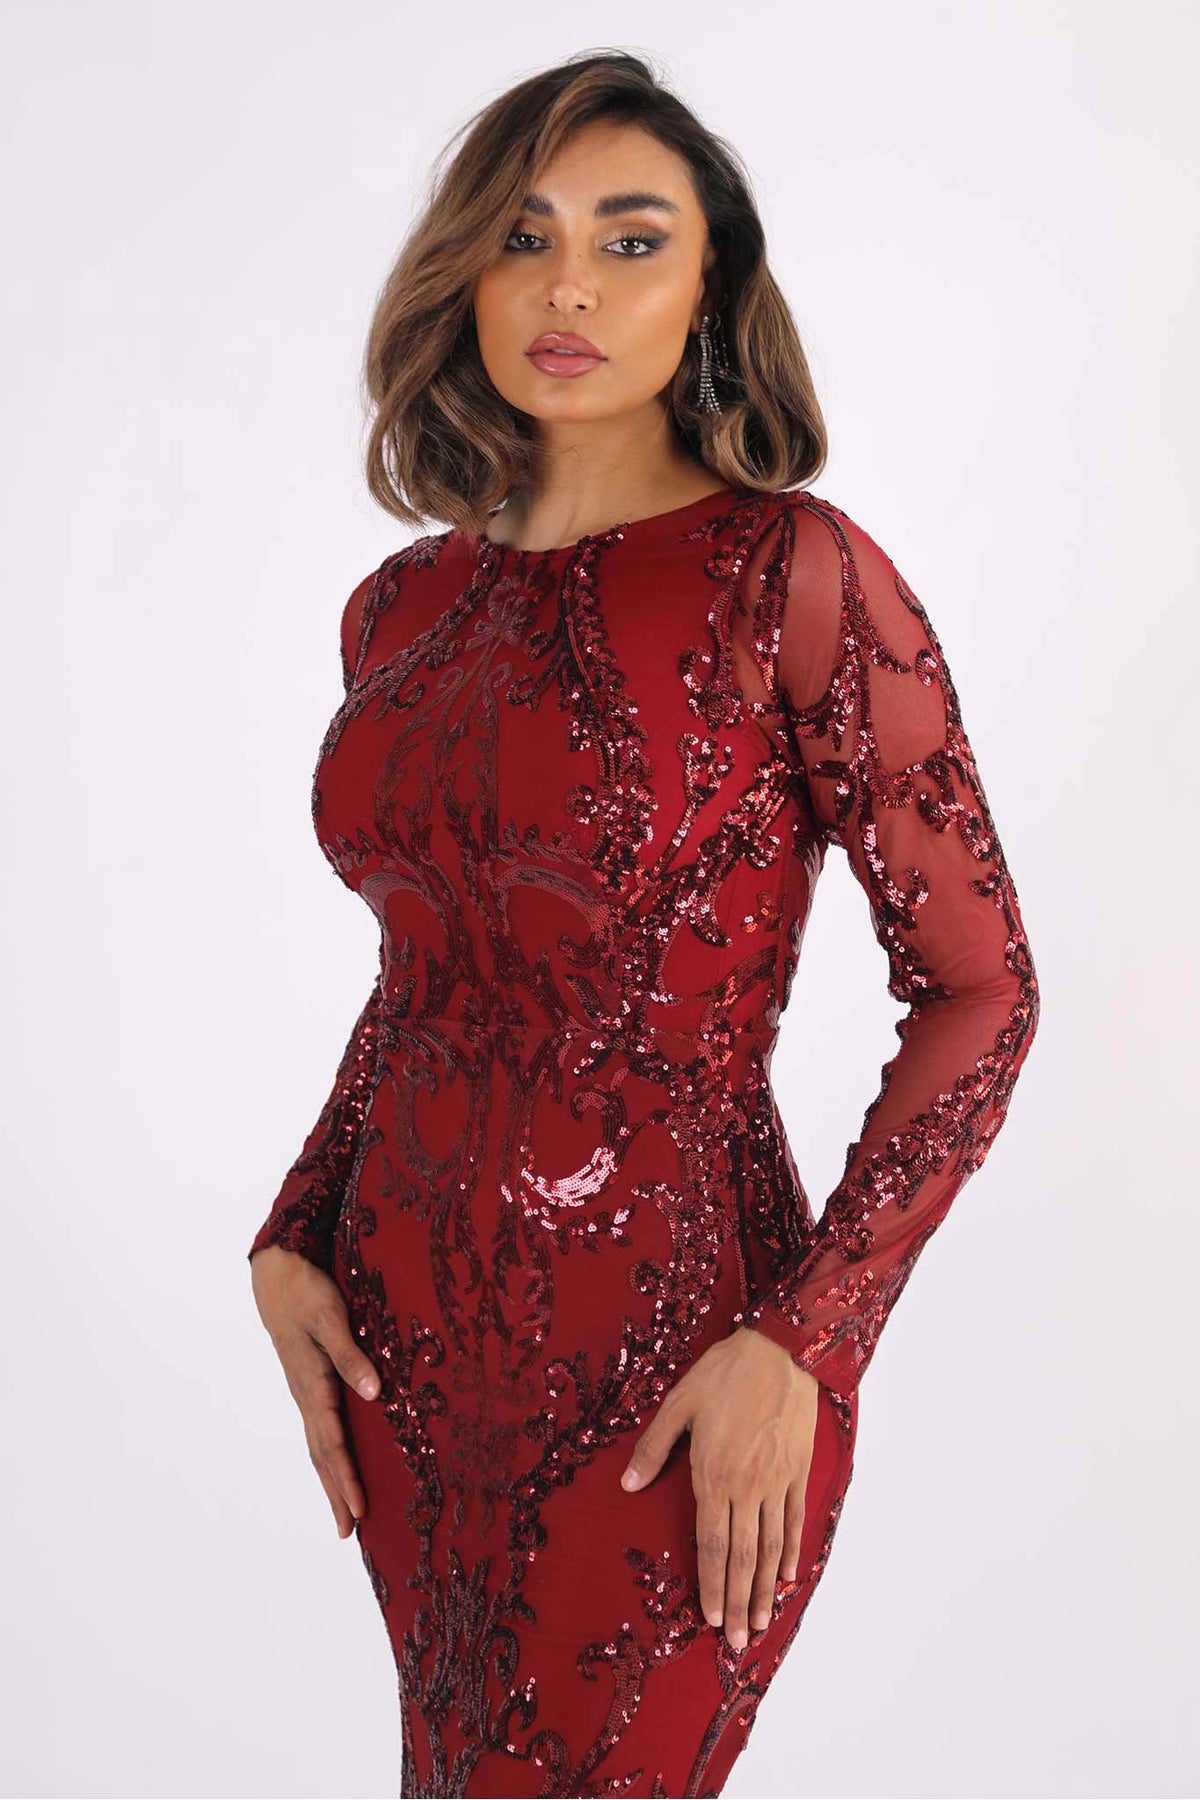 Deep Red Long Sleeve Pattern Sequin Floor Length Evening Gown with Round Neck and Fit & Flare Silhouette